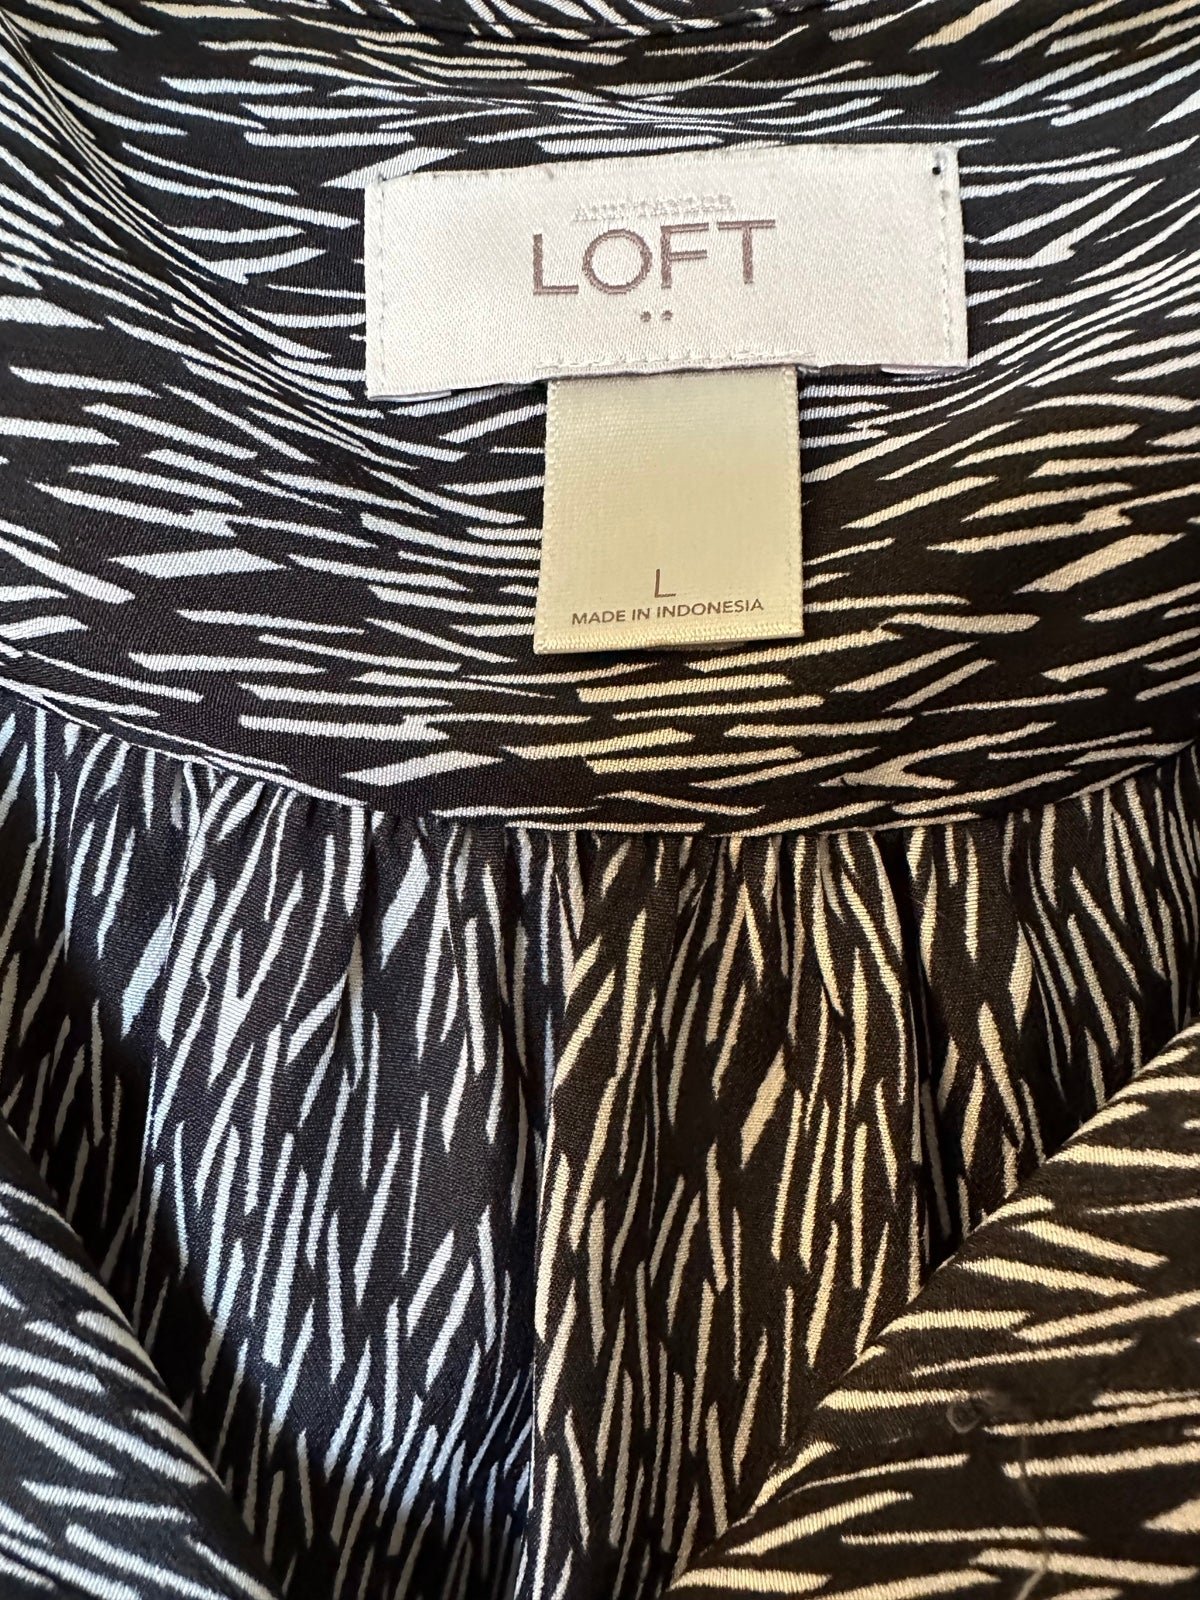 where to buy  Ann Taylor LOFT black and white dress NdbviXonX Factory Price